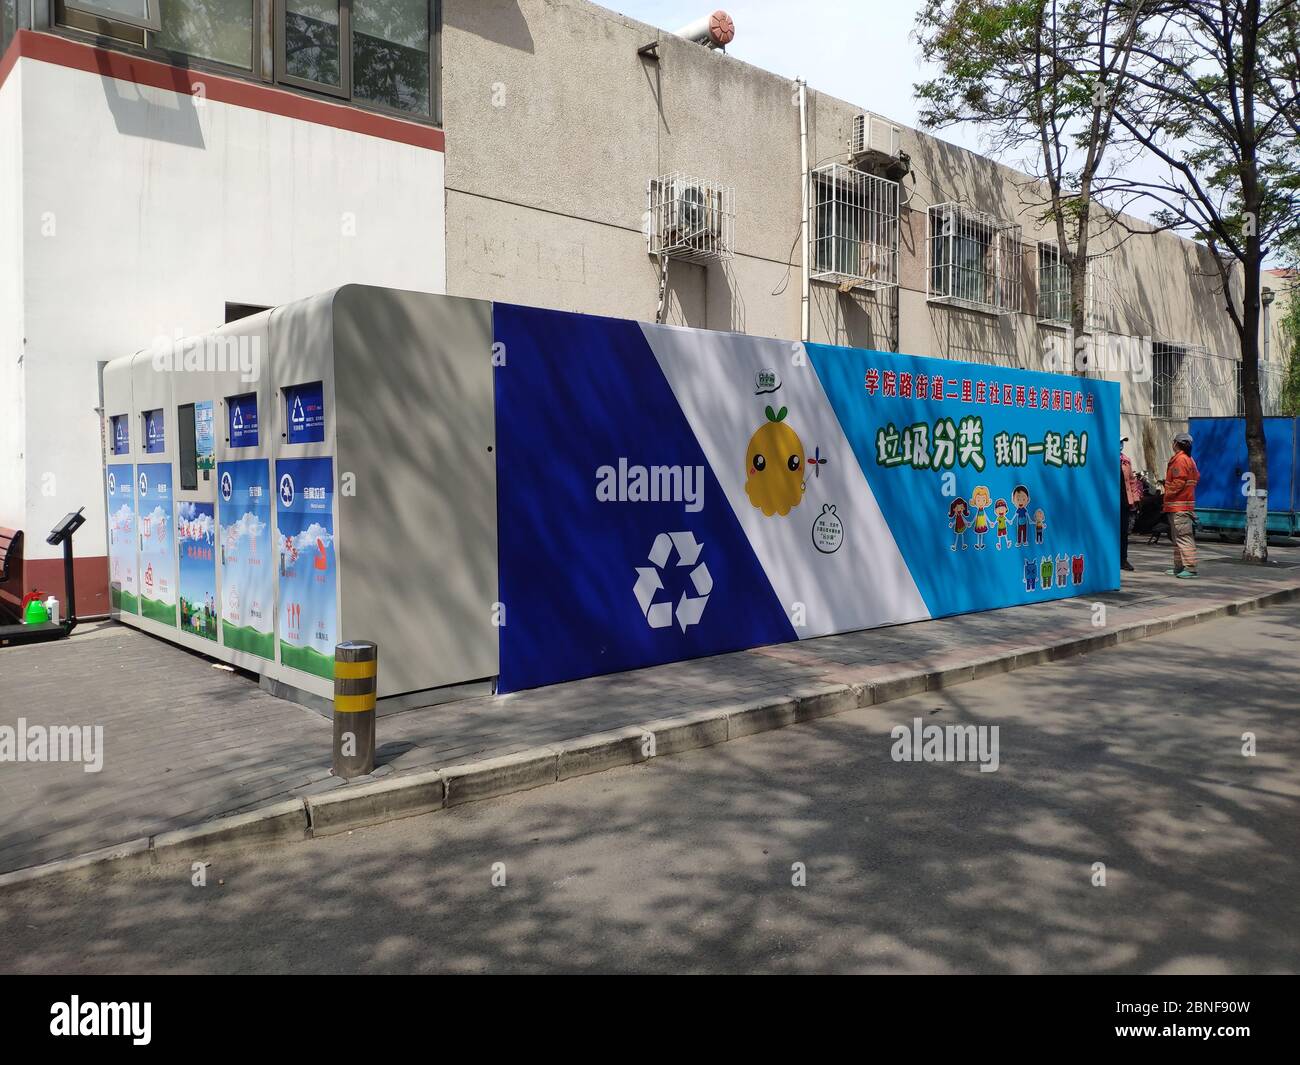 Notices about new waste sorting regulation are seen at a gated residential community, Beijing, China, 18 April 2020.   New regulation on waste sorting Stock Photo